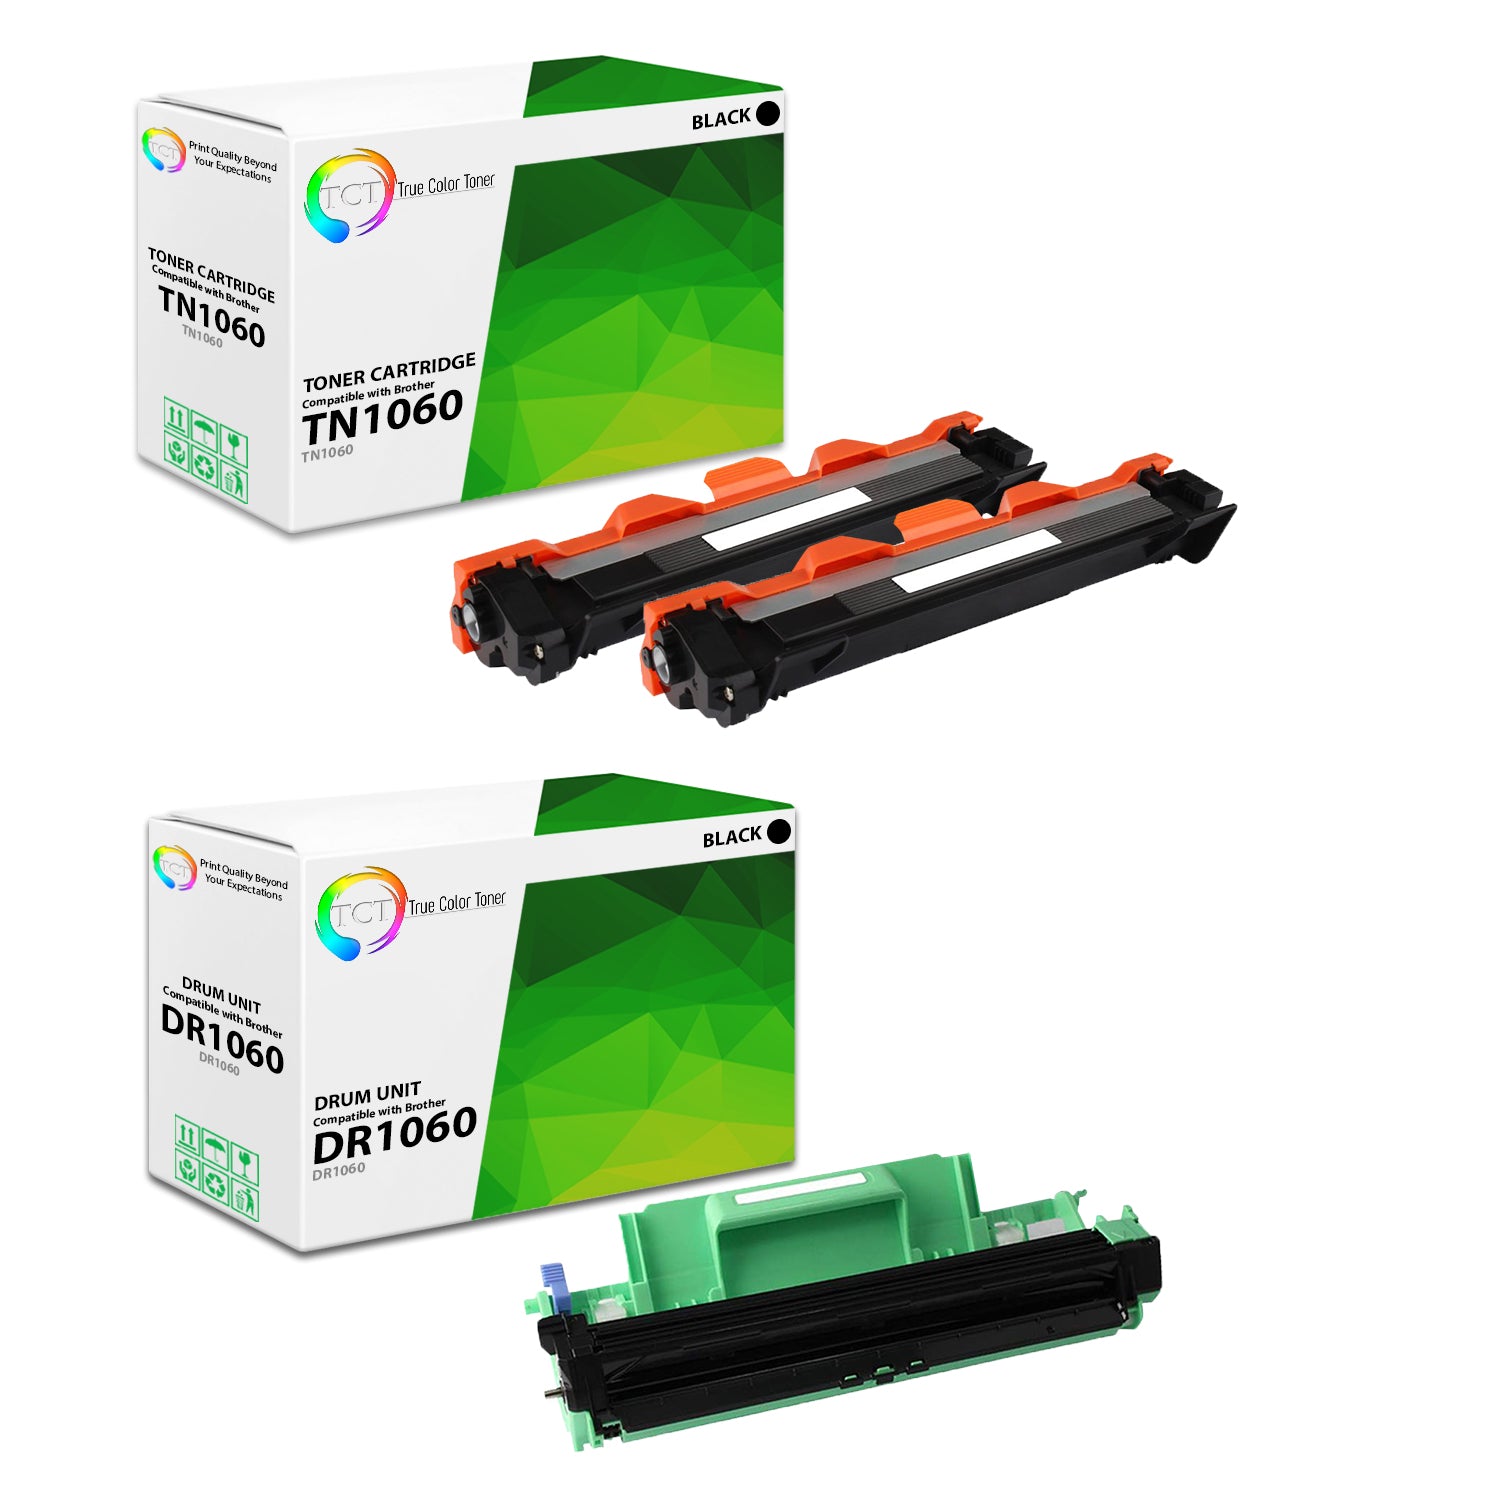 TCT Compatible Toner Cartridge and Drum Replacement for the Brother TN1060 DR1060 Series - 3 Pack